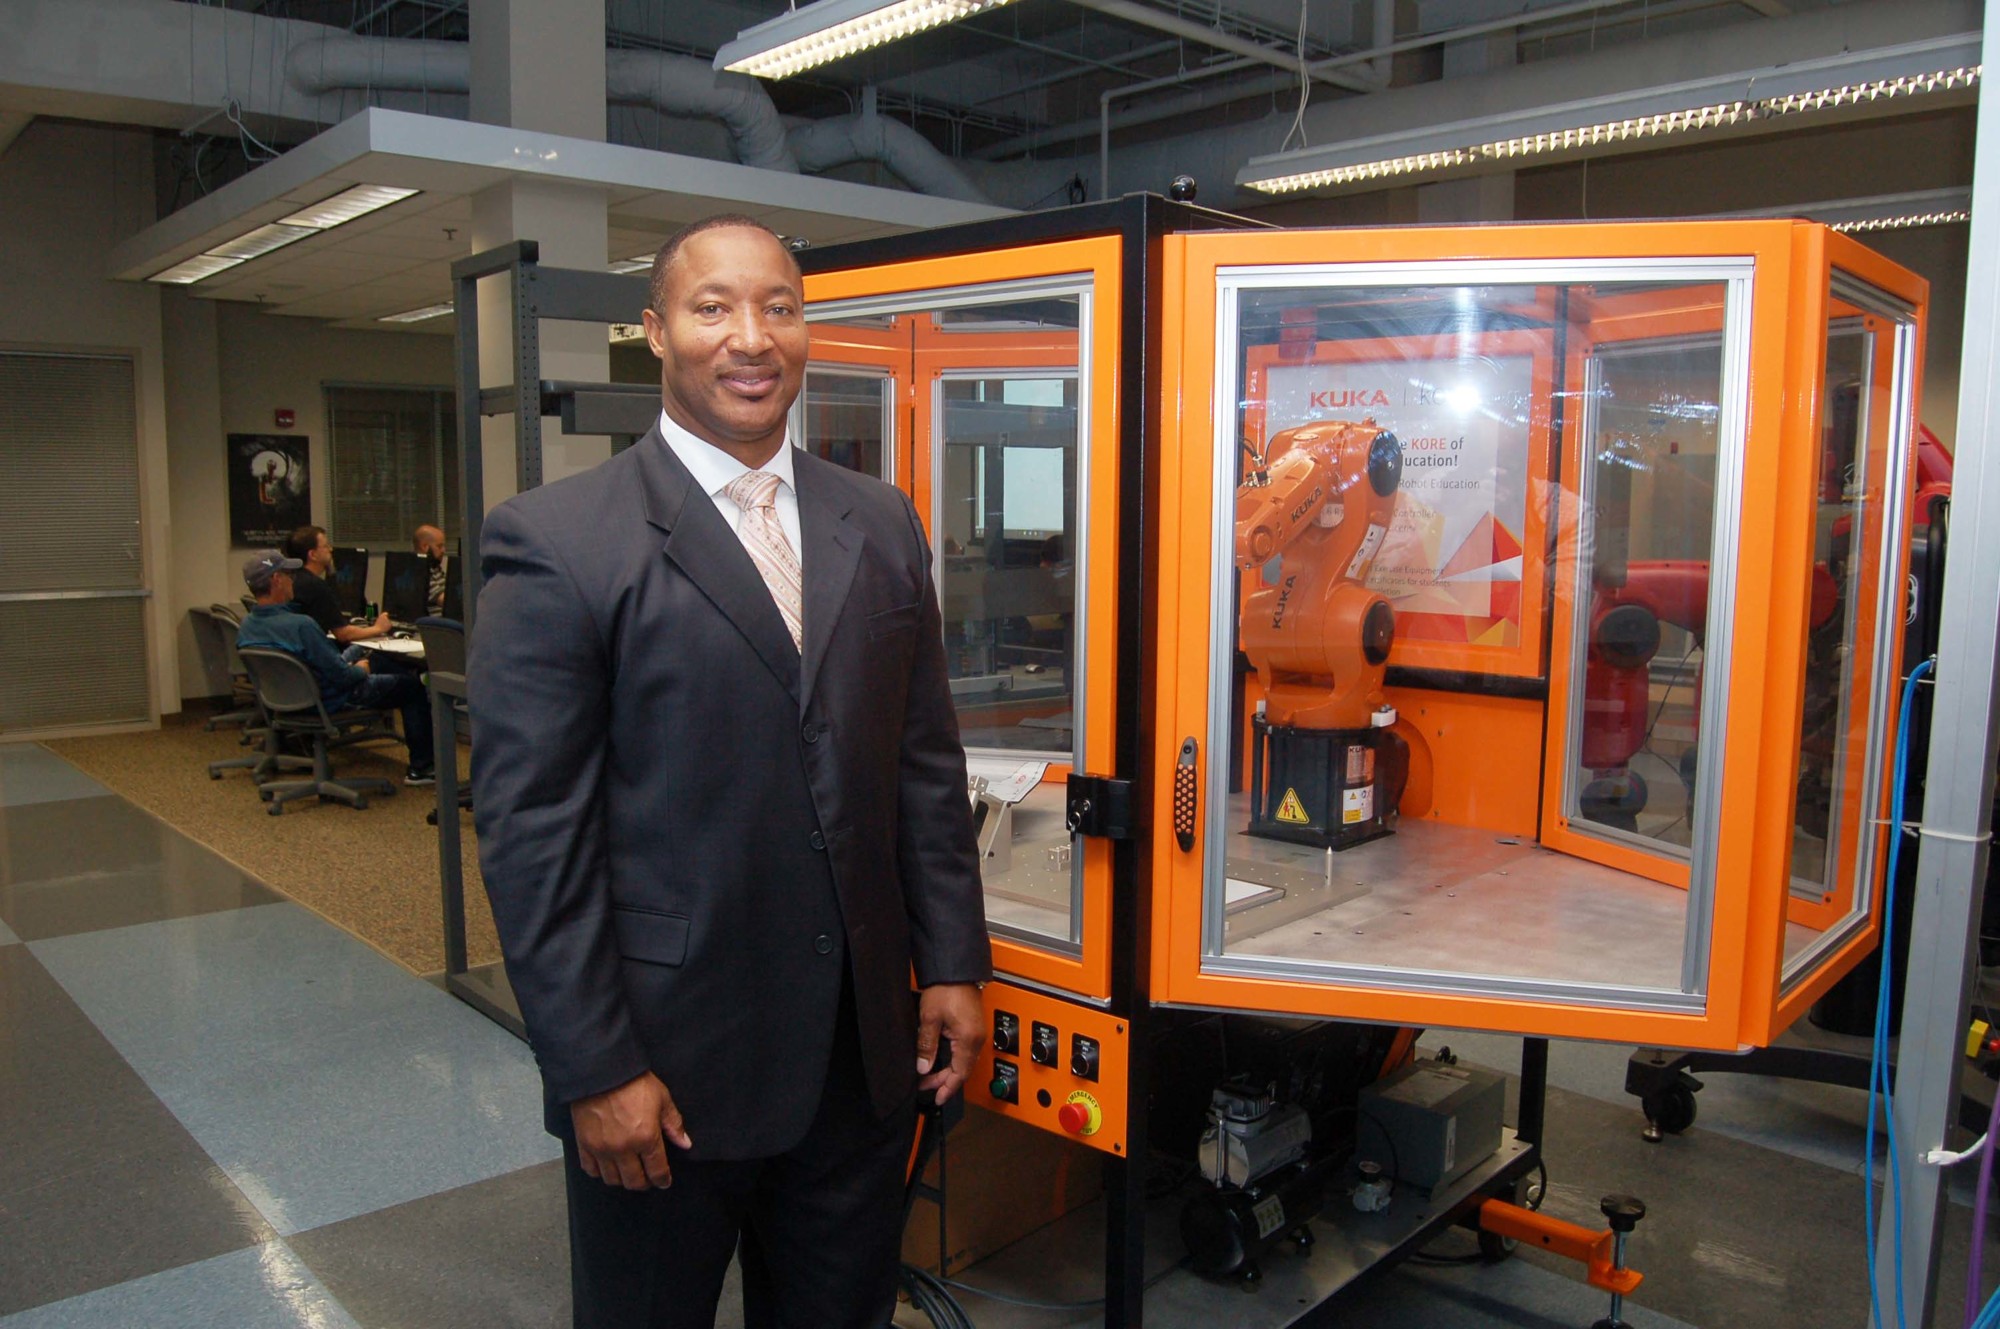 Florida State College at Jacksonville Associate Vice President of Workforce Development Cedrick Gibson with a training robot used by students enrolled in the advanced manufacturing career path.